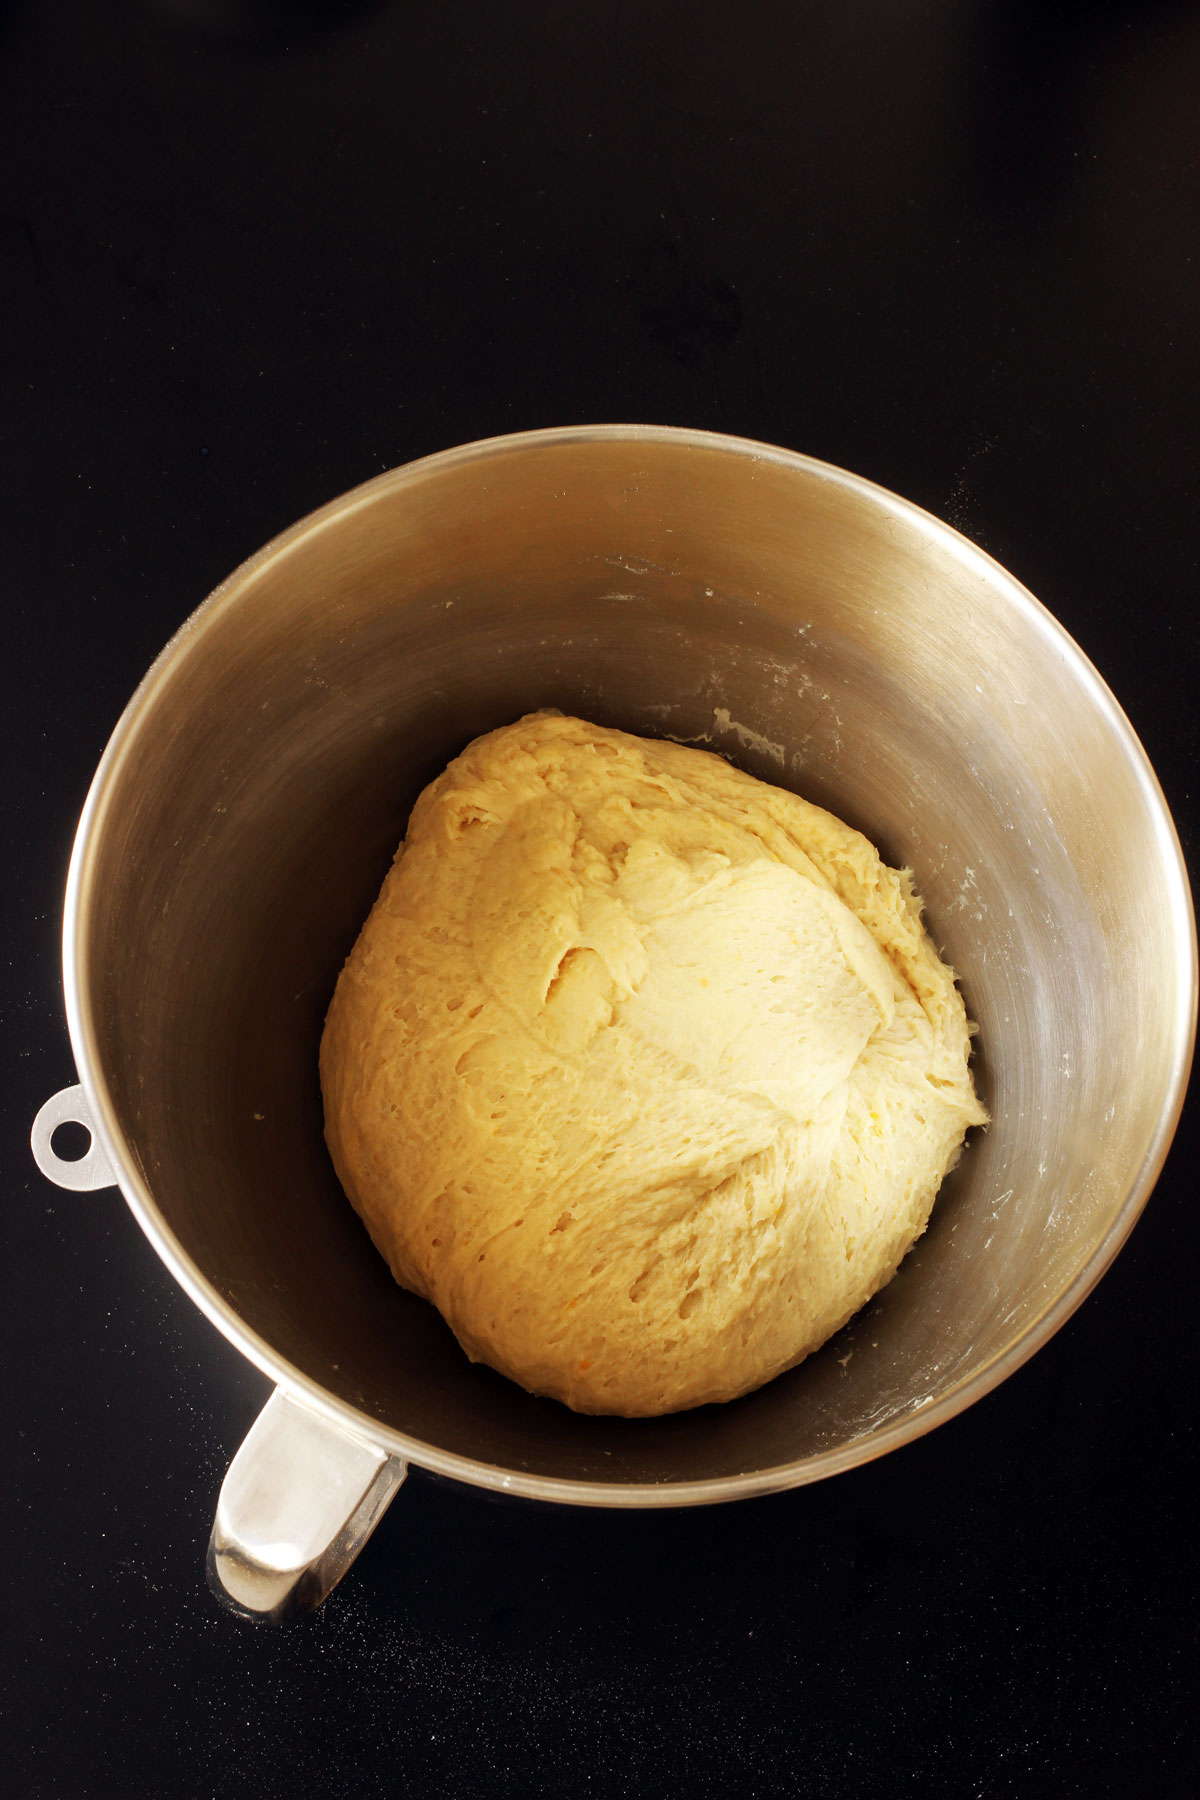 dough ball formed in bowl